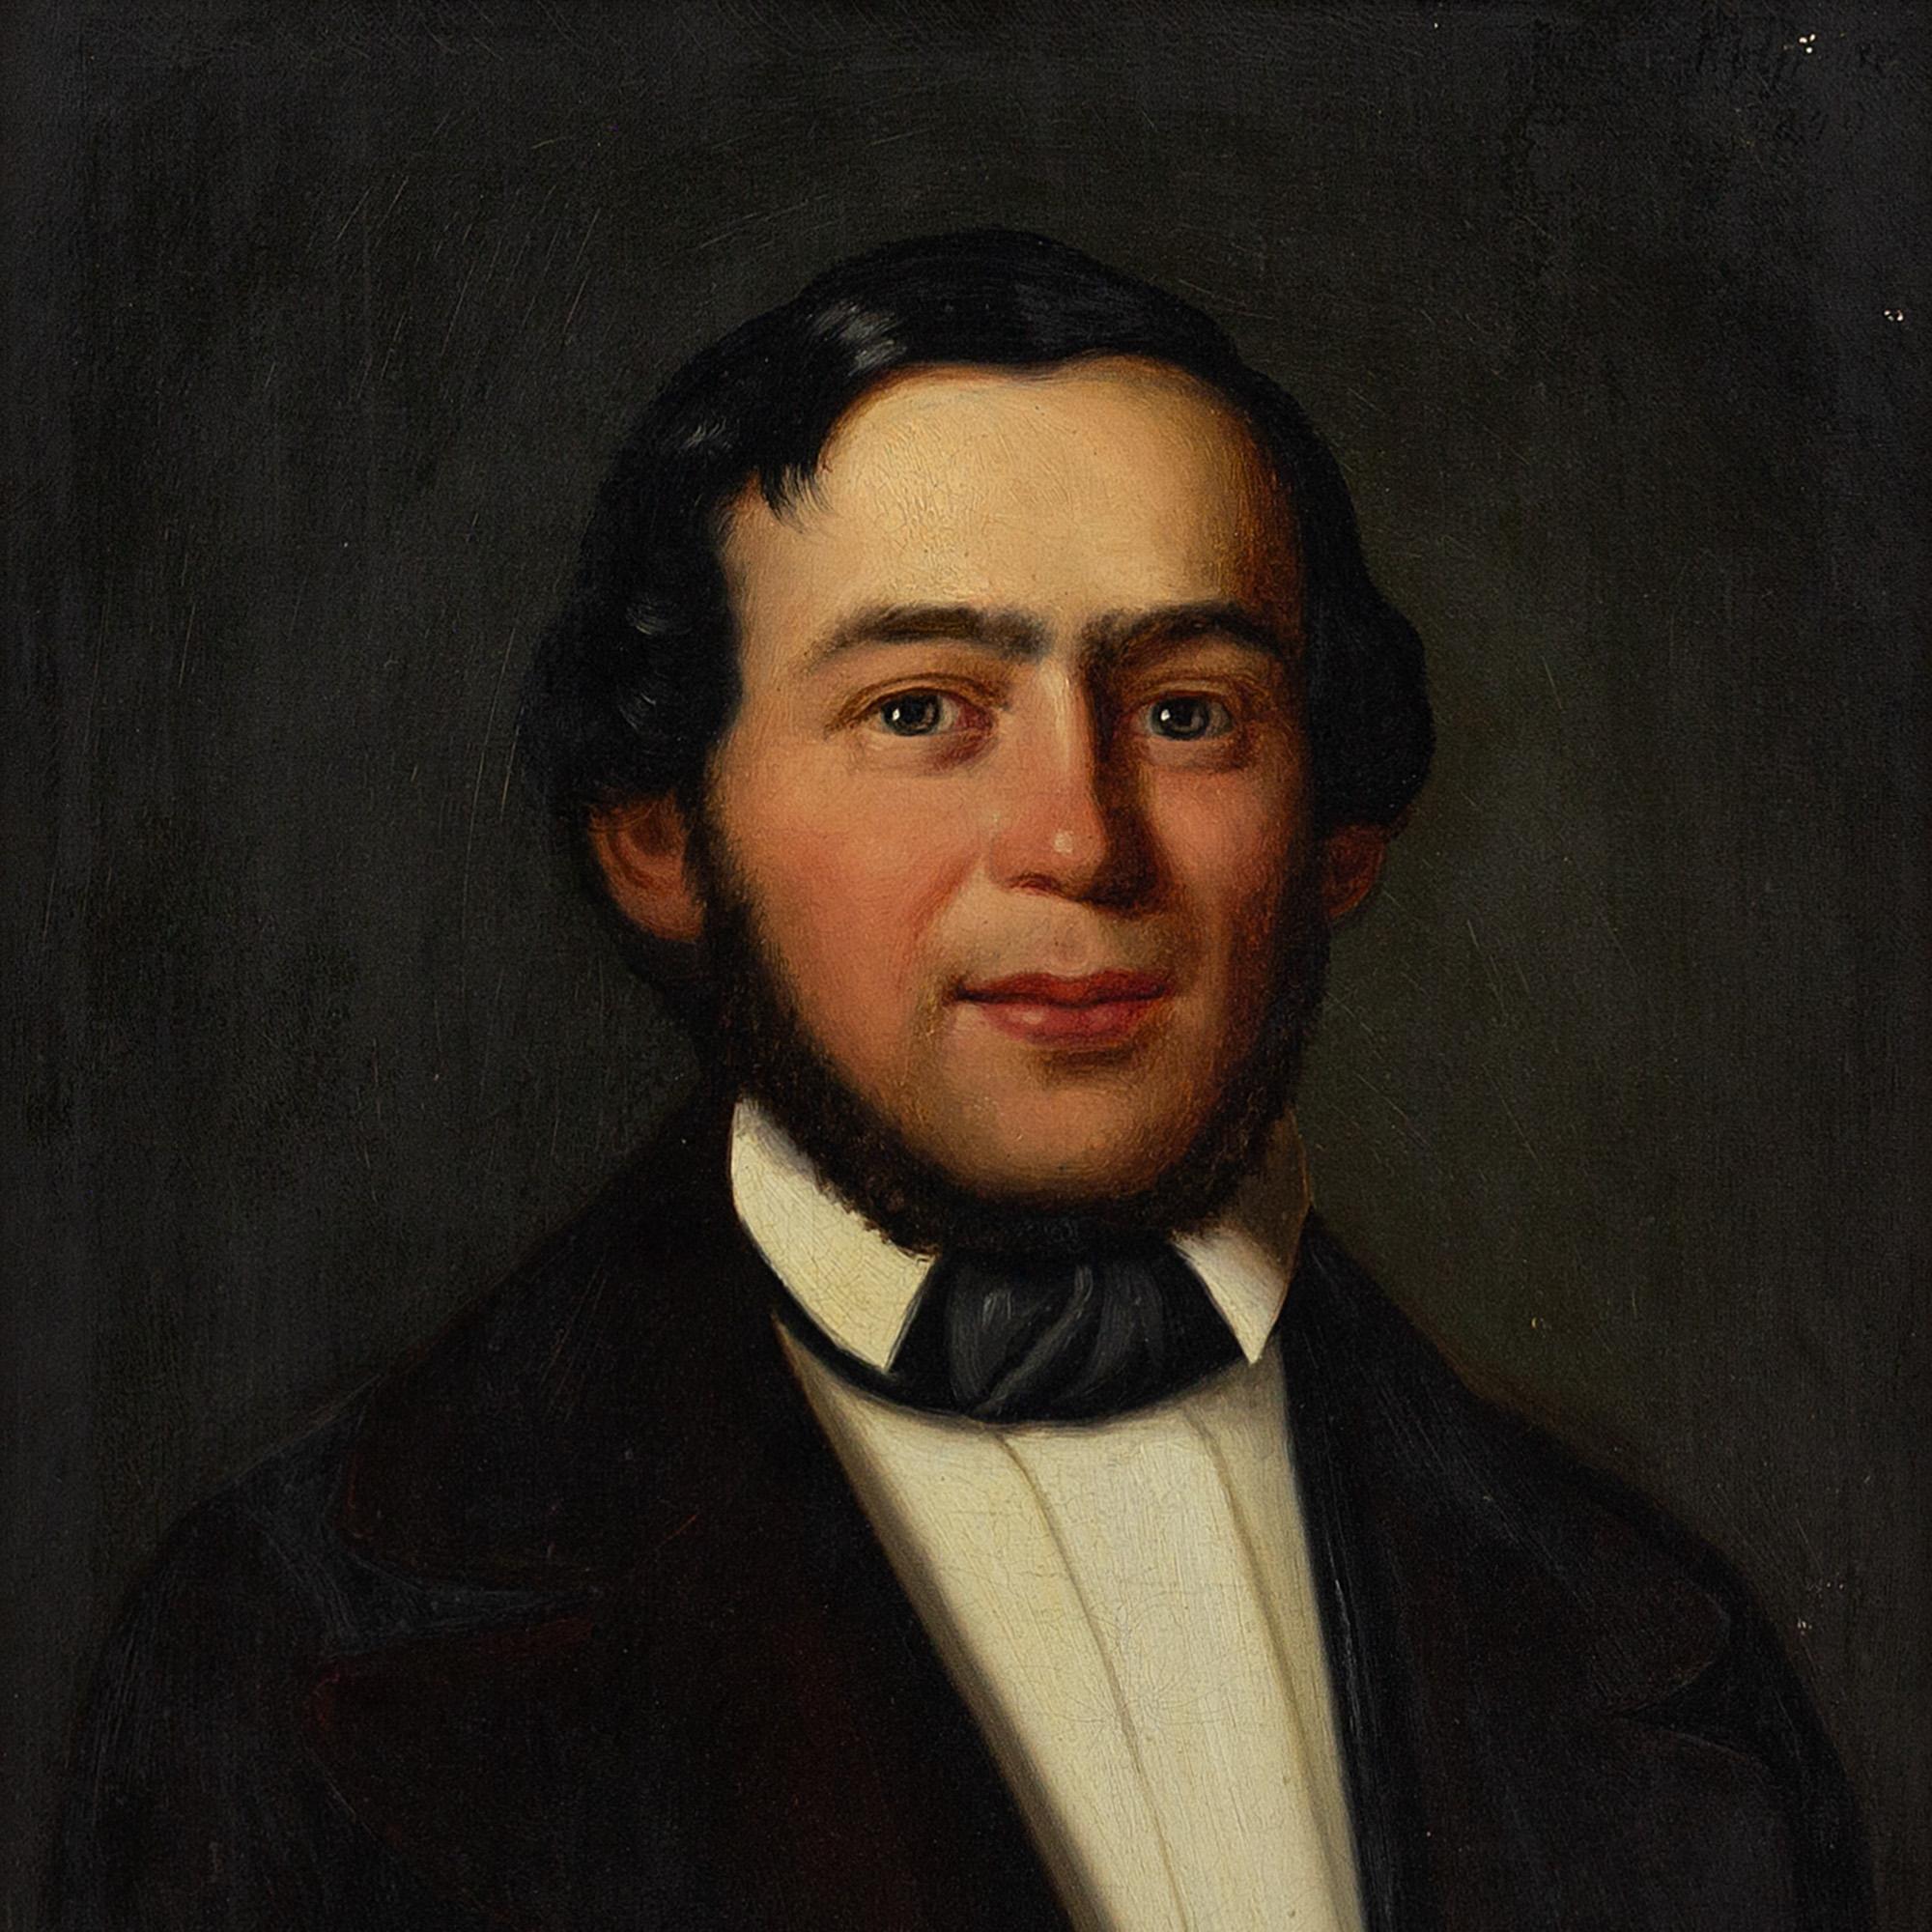 This charming mid-19th-century oil painting depicts a gentleman wearing a white shirt with a black coat and necktie. His collars are turned down and his hair is styled with a side parting.

In the 1840s/50s, men tended to wear their hair covering